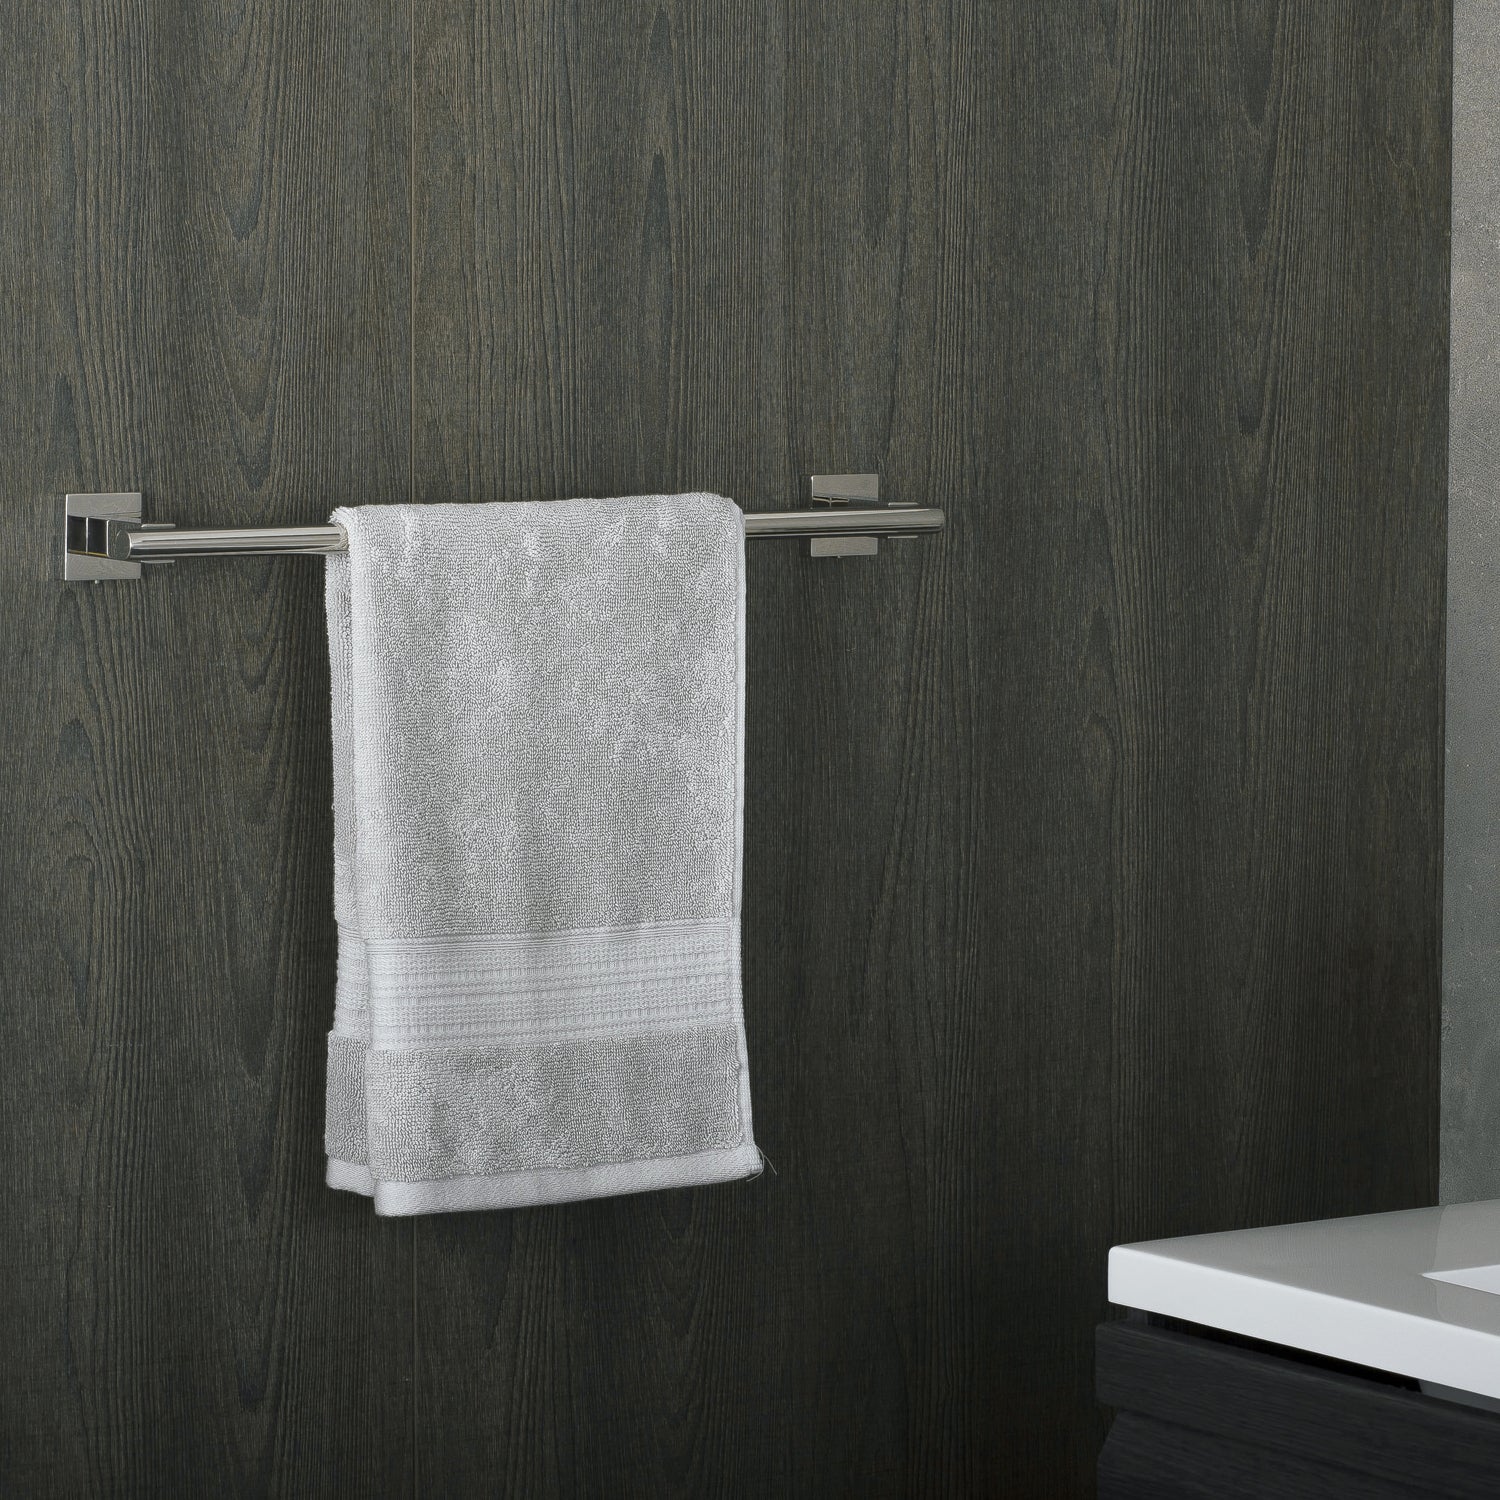 DAX Single Towel Bar, Wall Mount Stainless Steel, Satin Finish, 19-11/16 x 1-5/8 x 2-13/16 Inches (DAX-G0103-S-20)